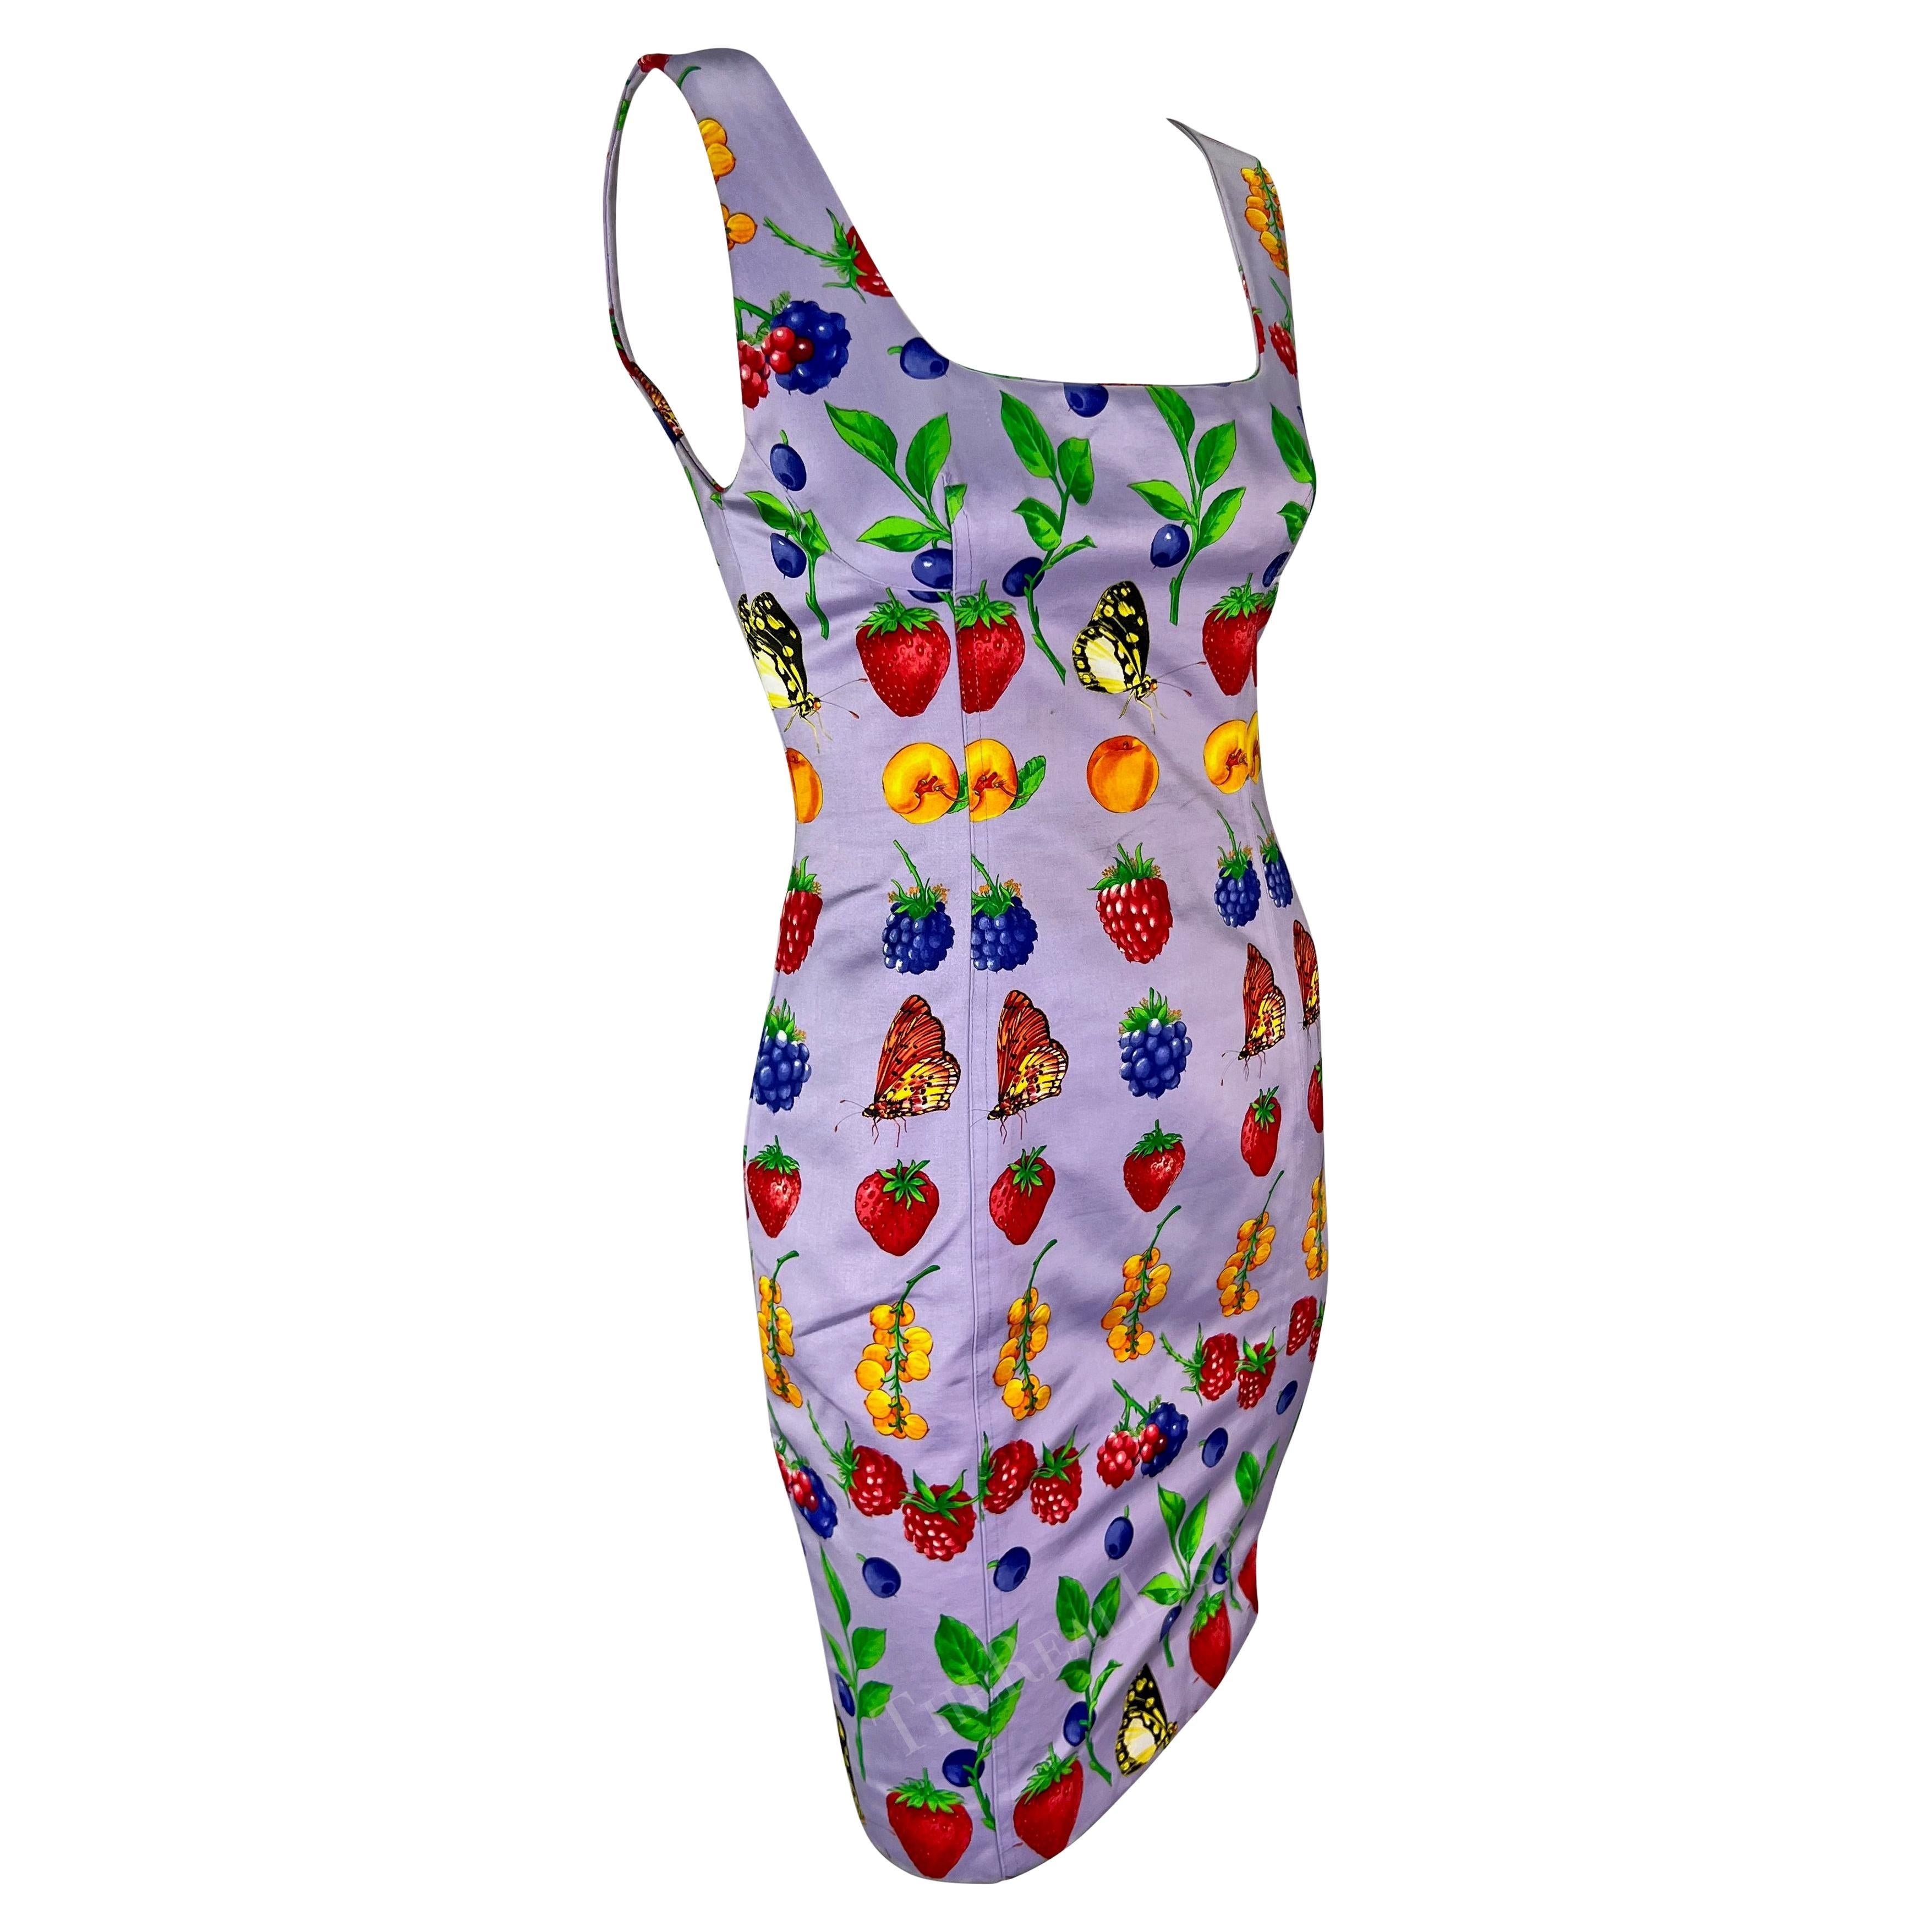 S/S 1995 Gianni Versace Butterfly Berry Garden Print Lavender Pencil Dress For Sale 1